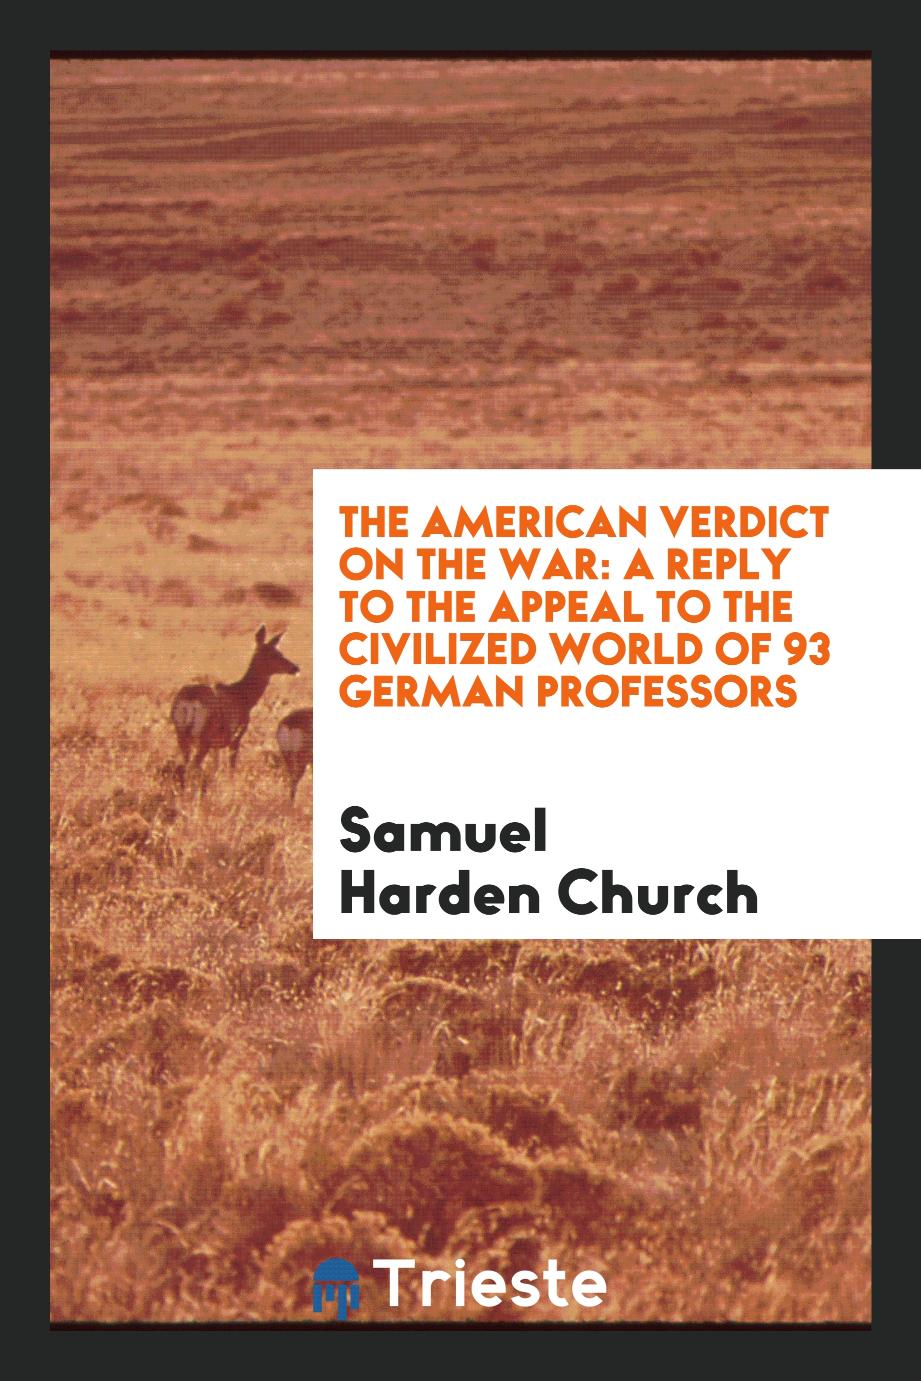 The American Verdict on the War: A Reply to the Appeal to the Civilized world of 93 german professors